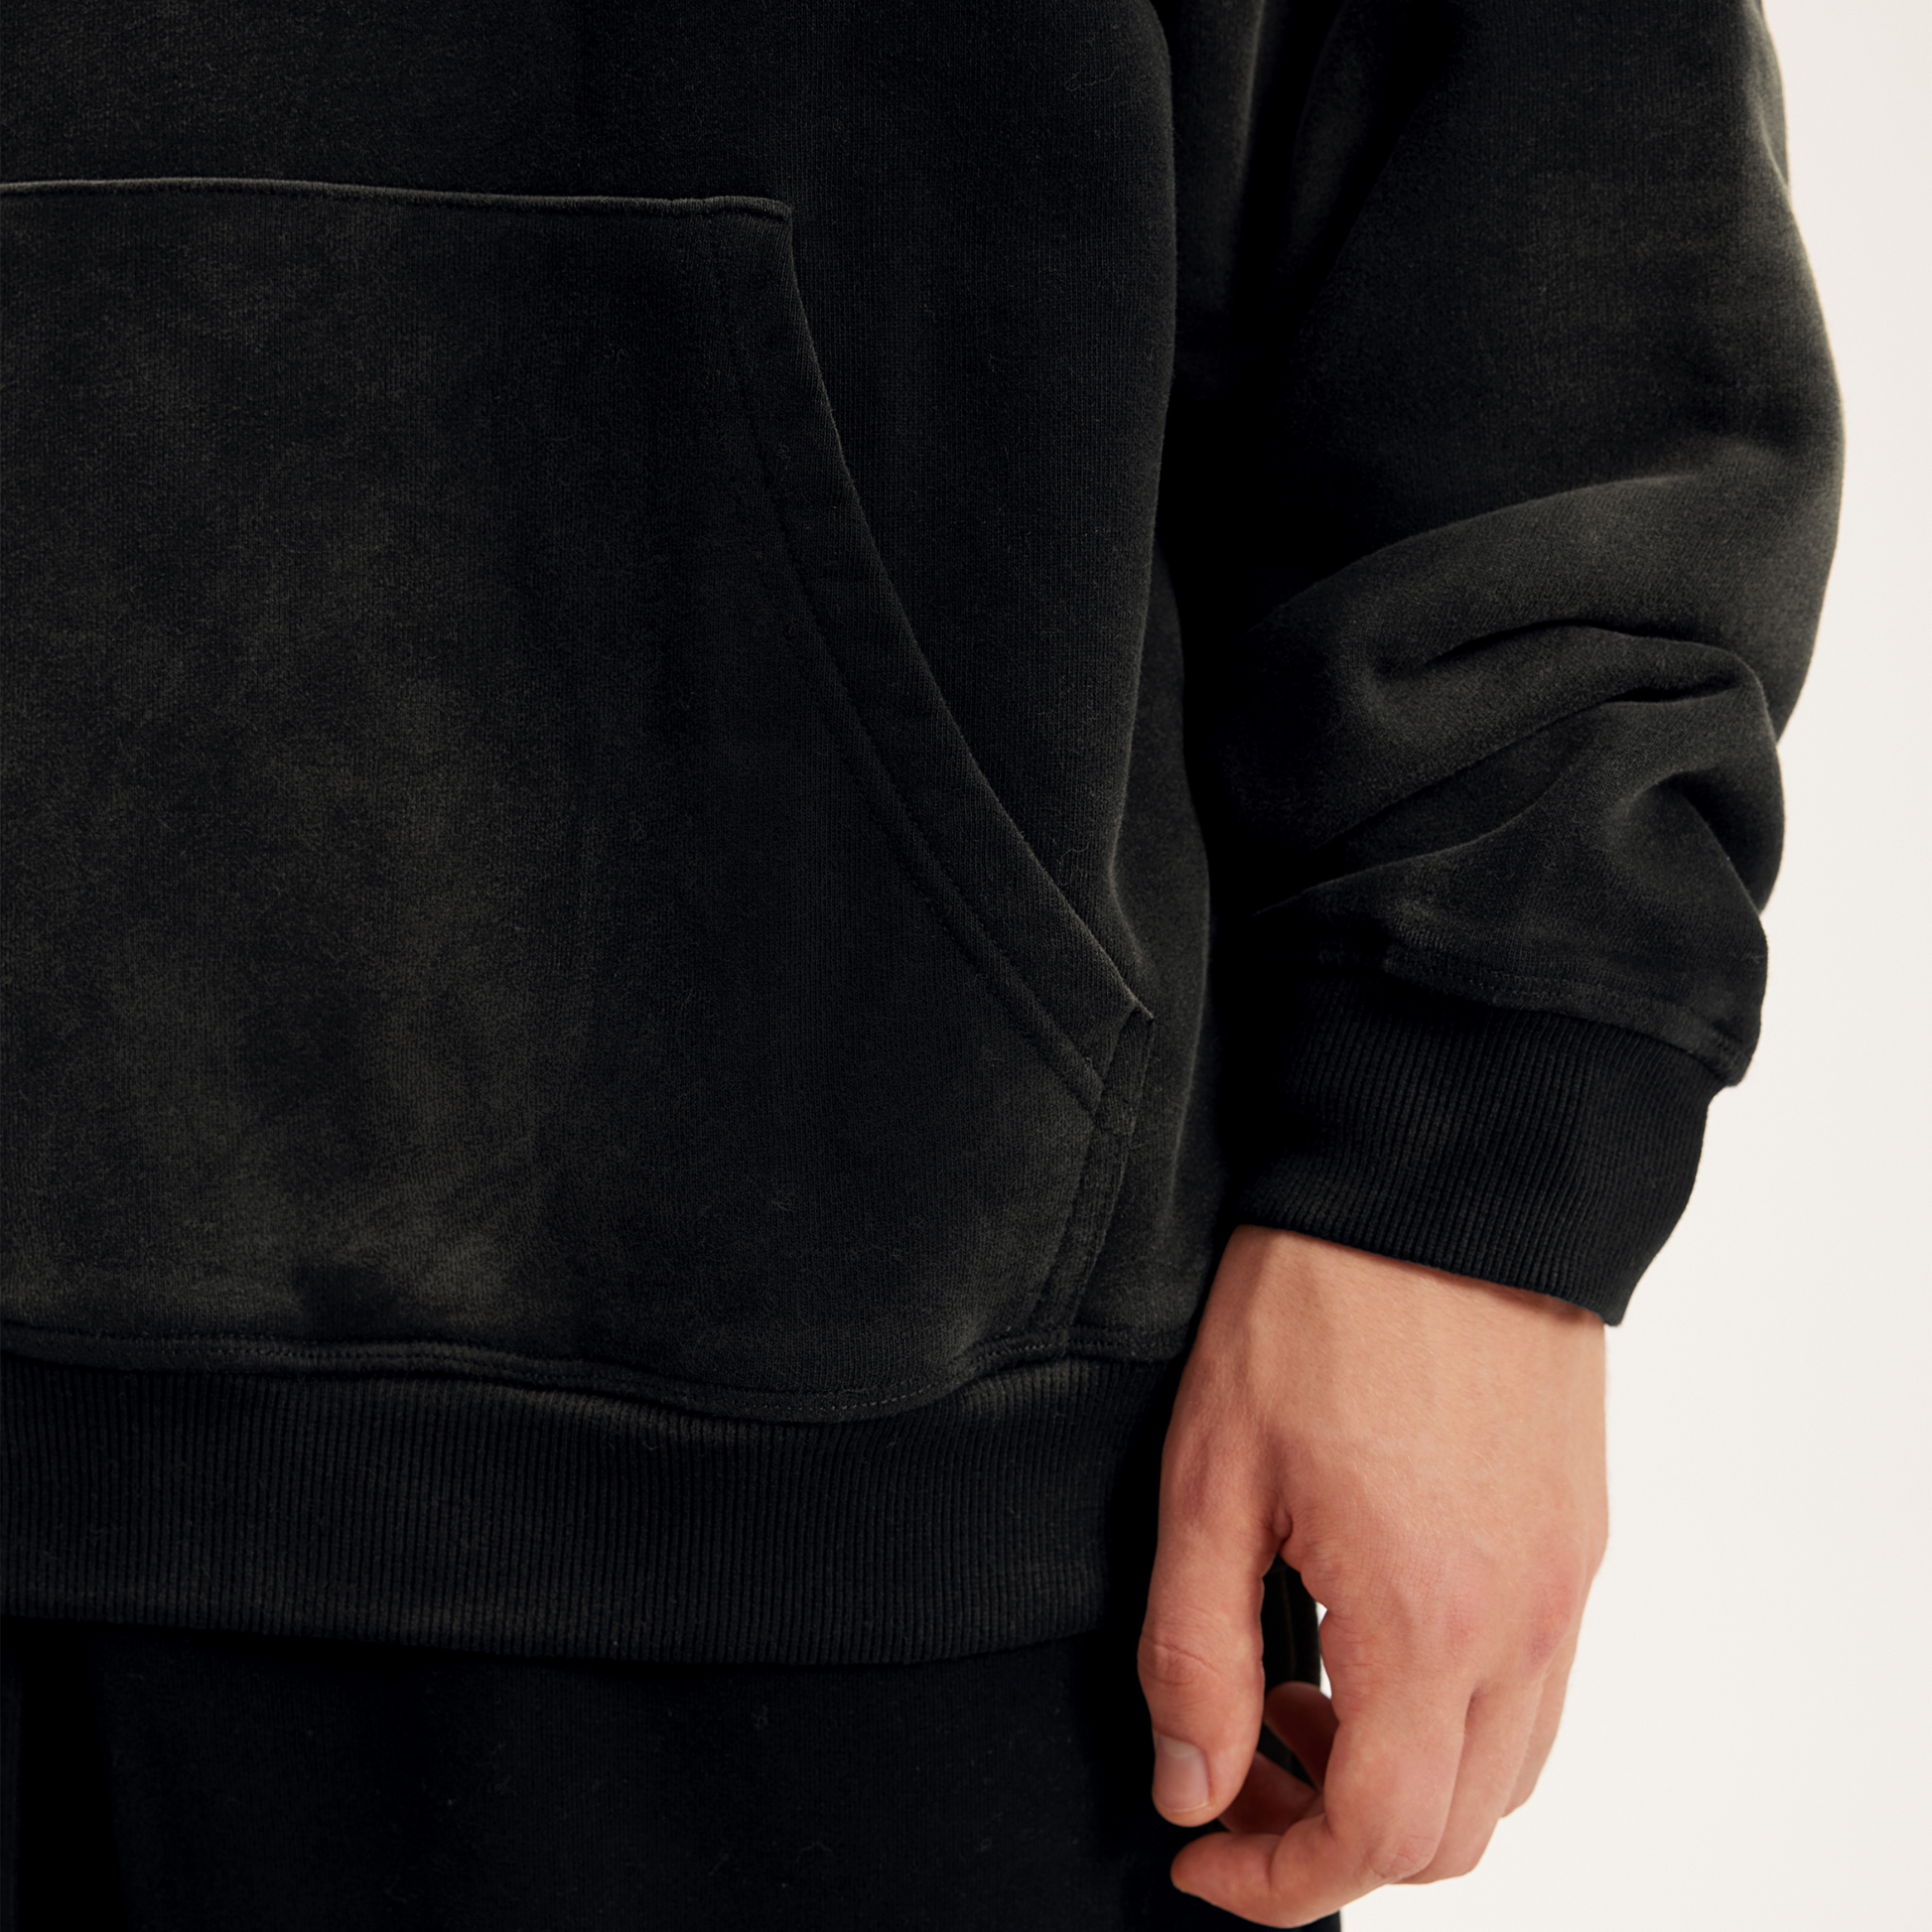 zoomed in left lower details of dyed black hoodie, streetwear hoodies collection product details